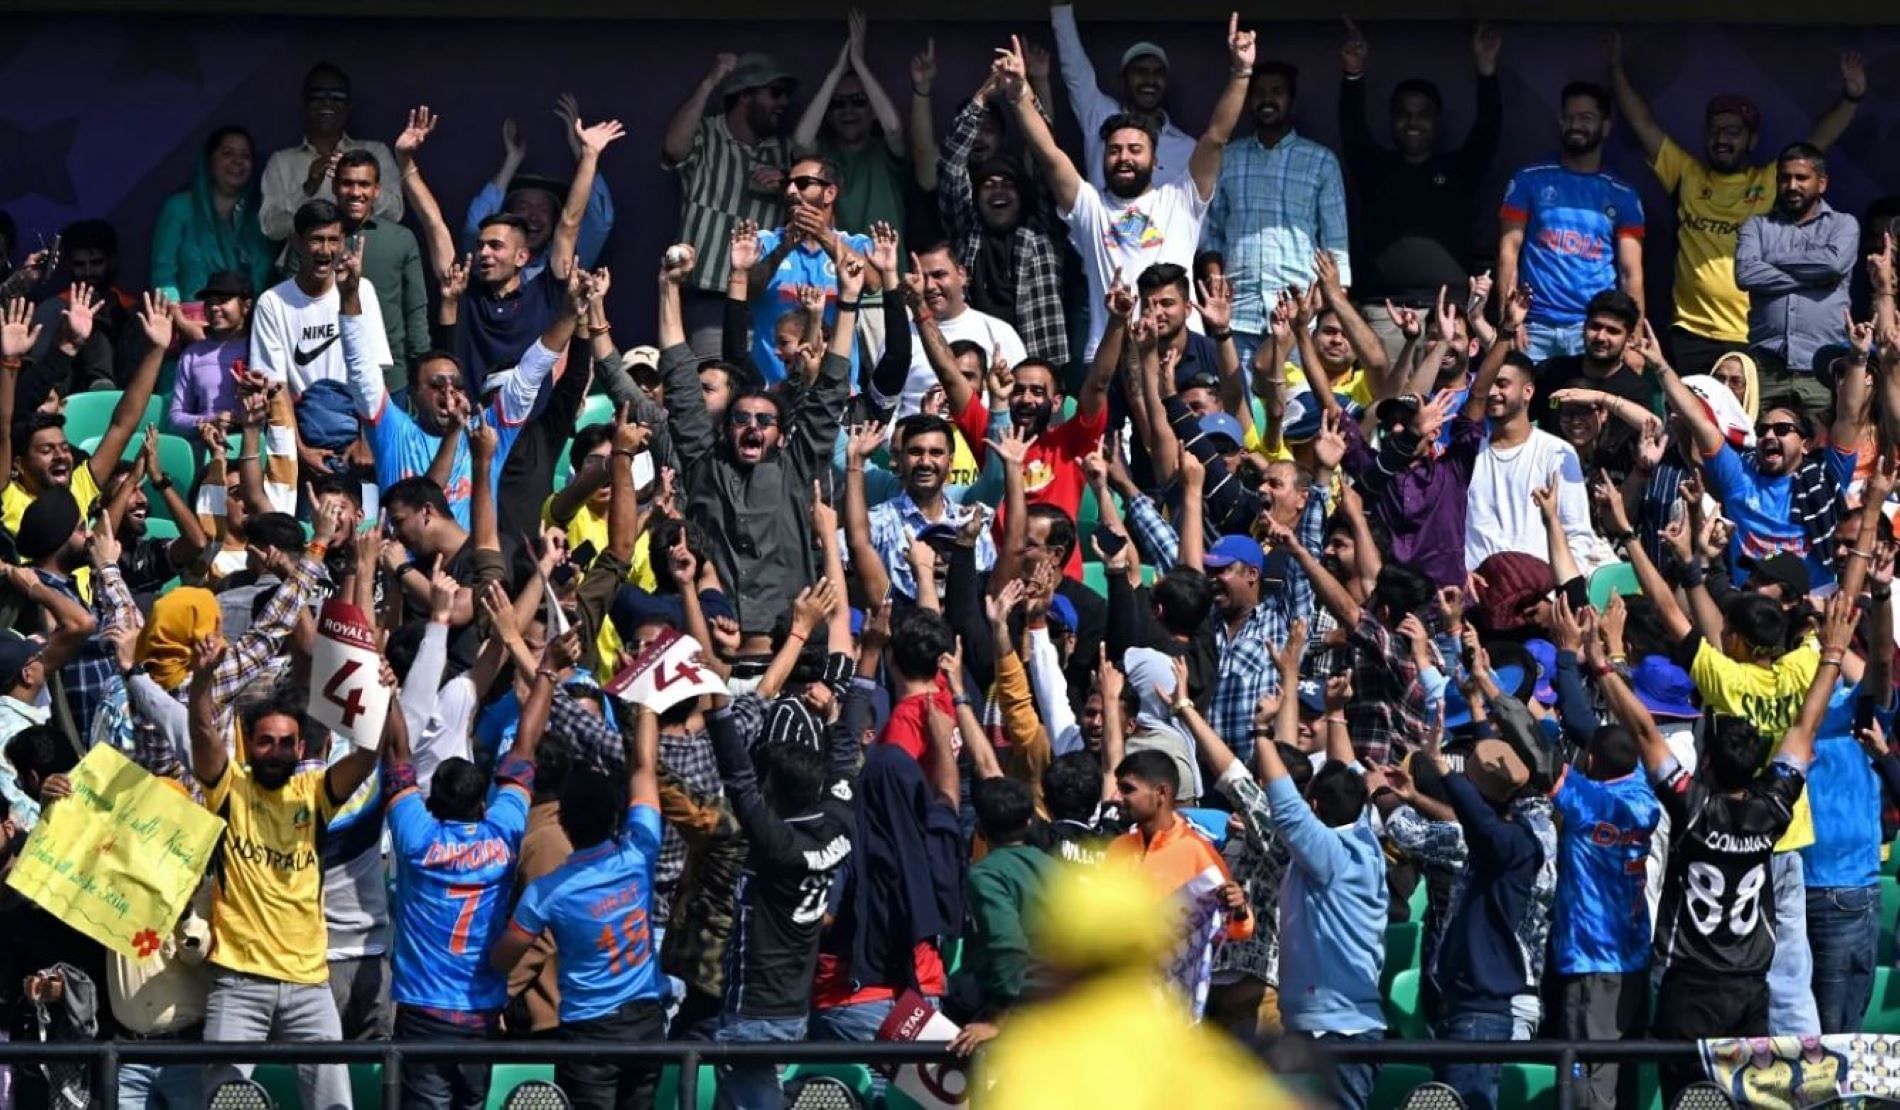 The crowd in Dharamsala witnessed arguably the match of the tournament.